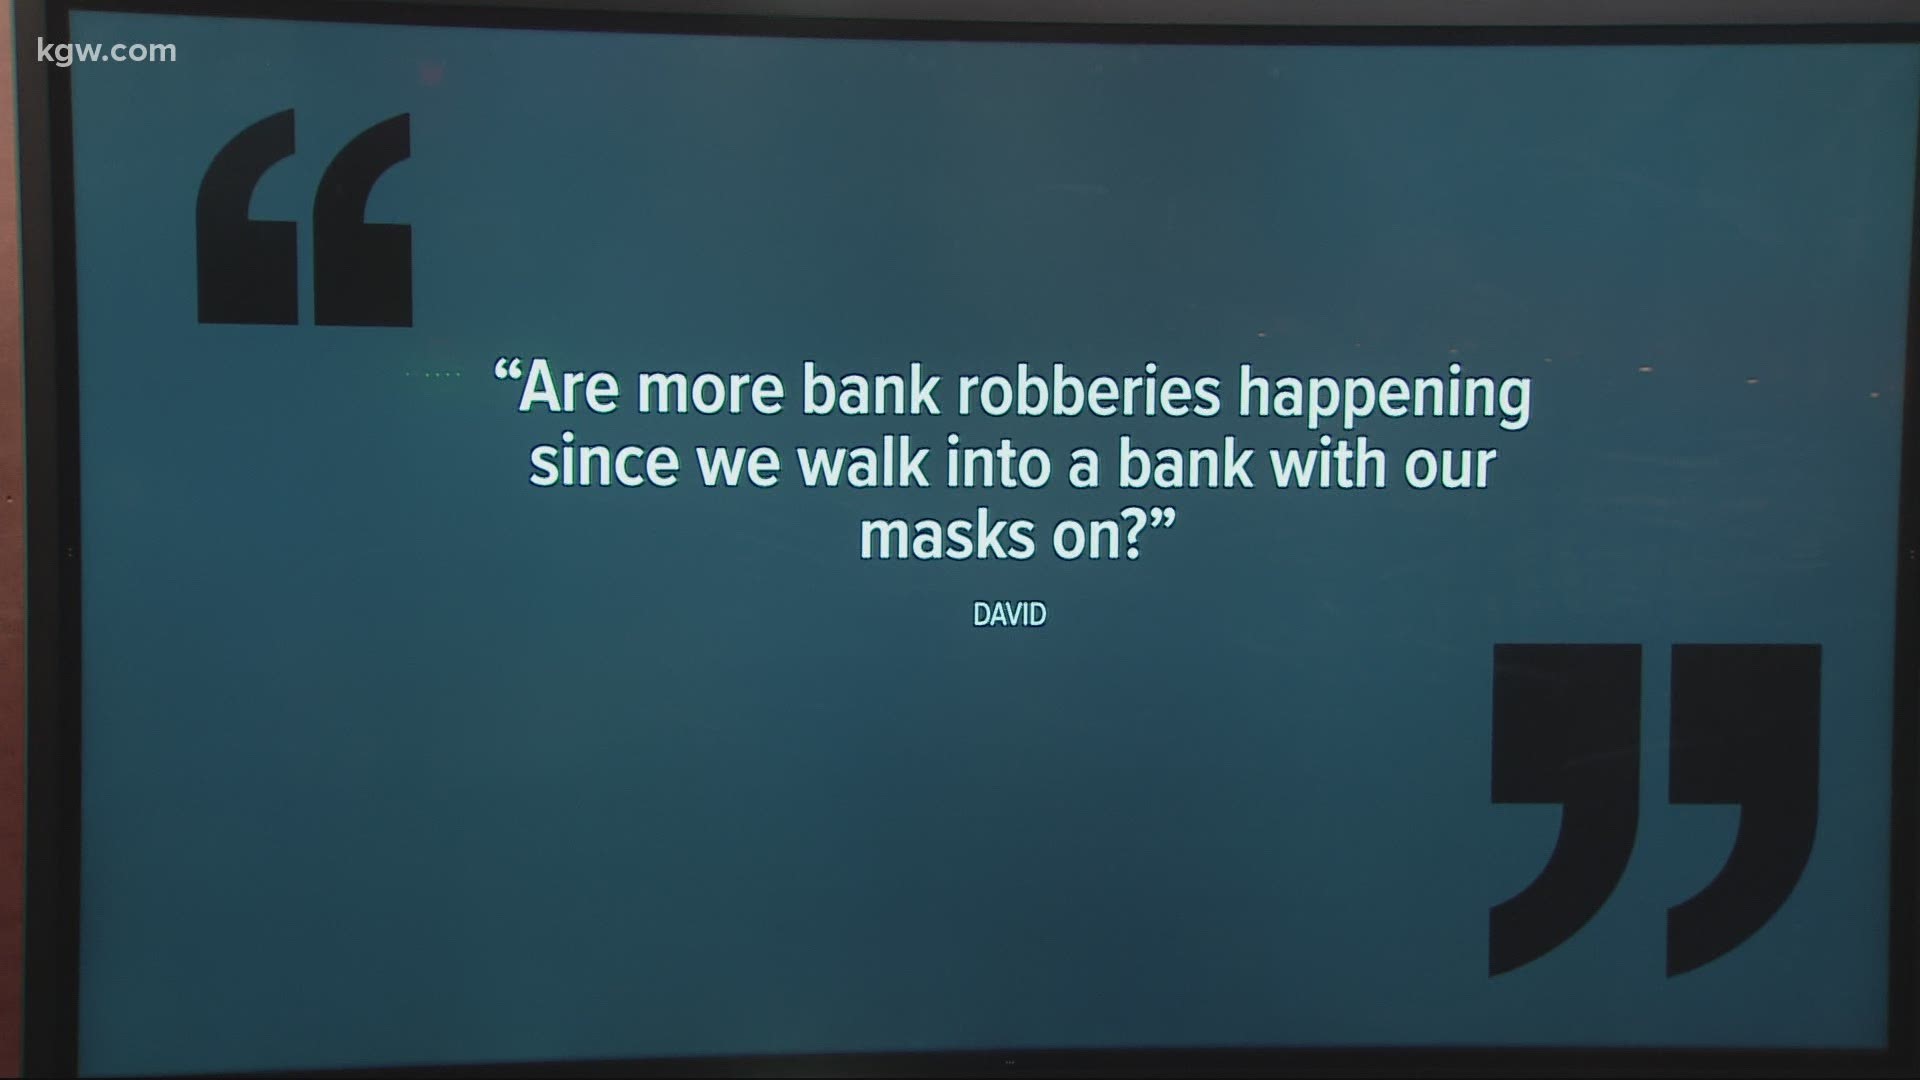 Here’s kind of a different question from David:  Are more bank robberies happening since we walk into a bank with our masks on?